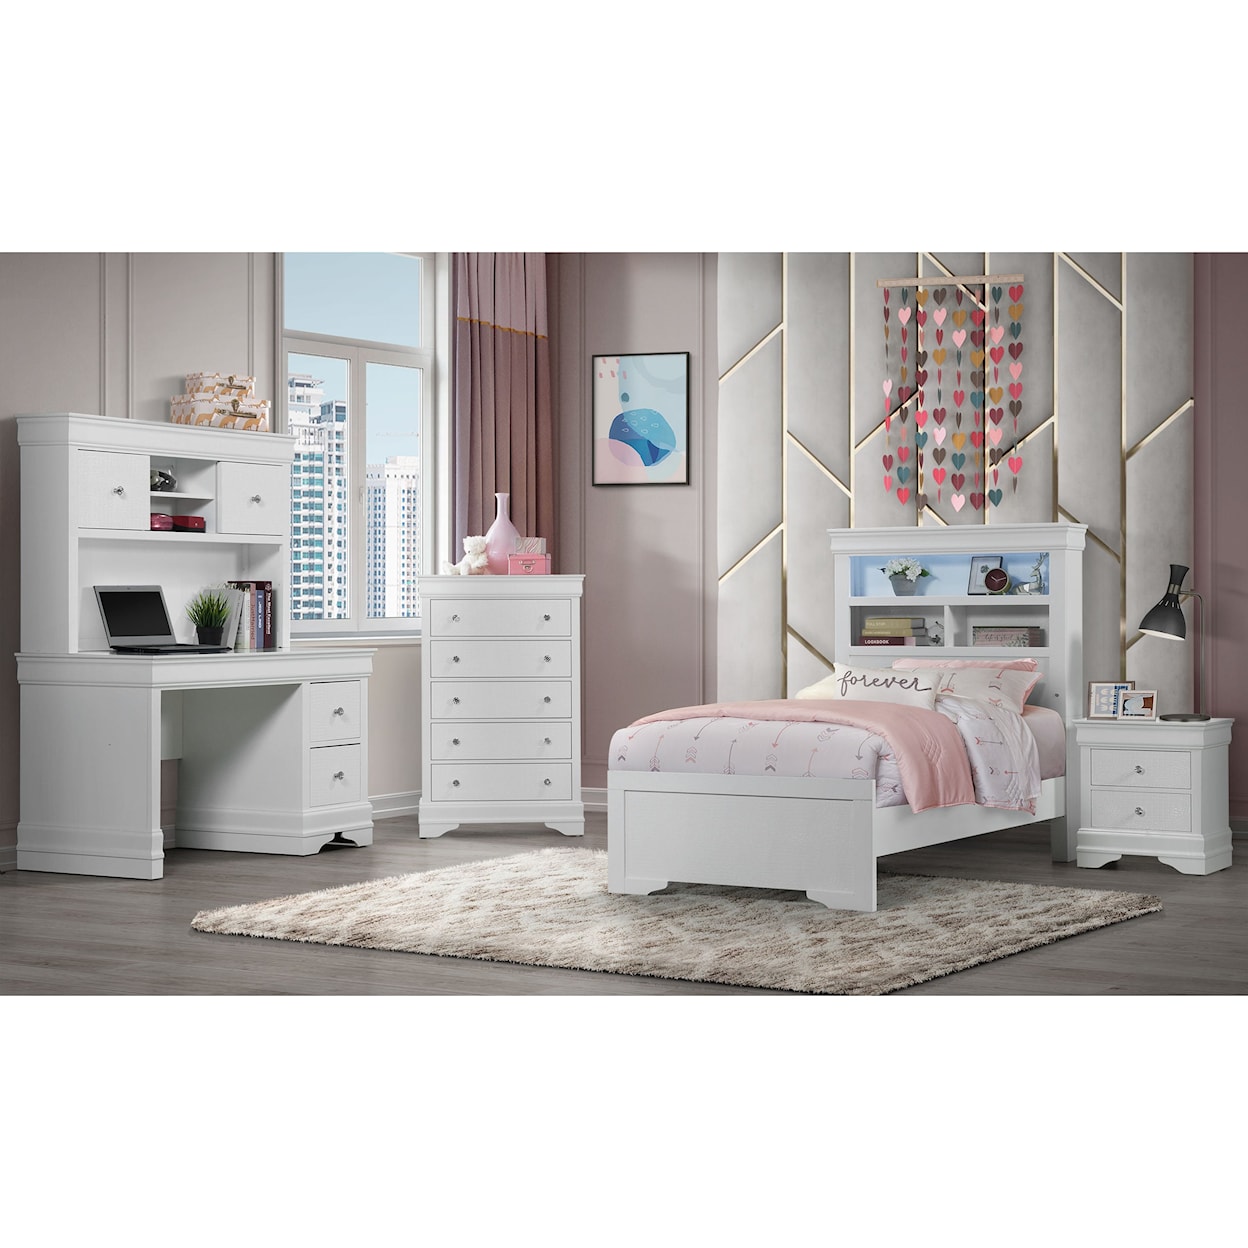 Global Furniture Pompei Twin Bed with Desk, Nightstand and Chest